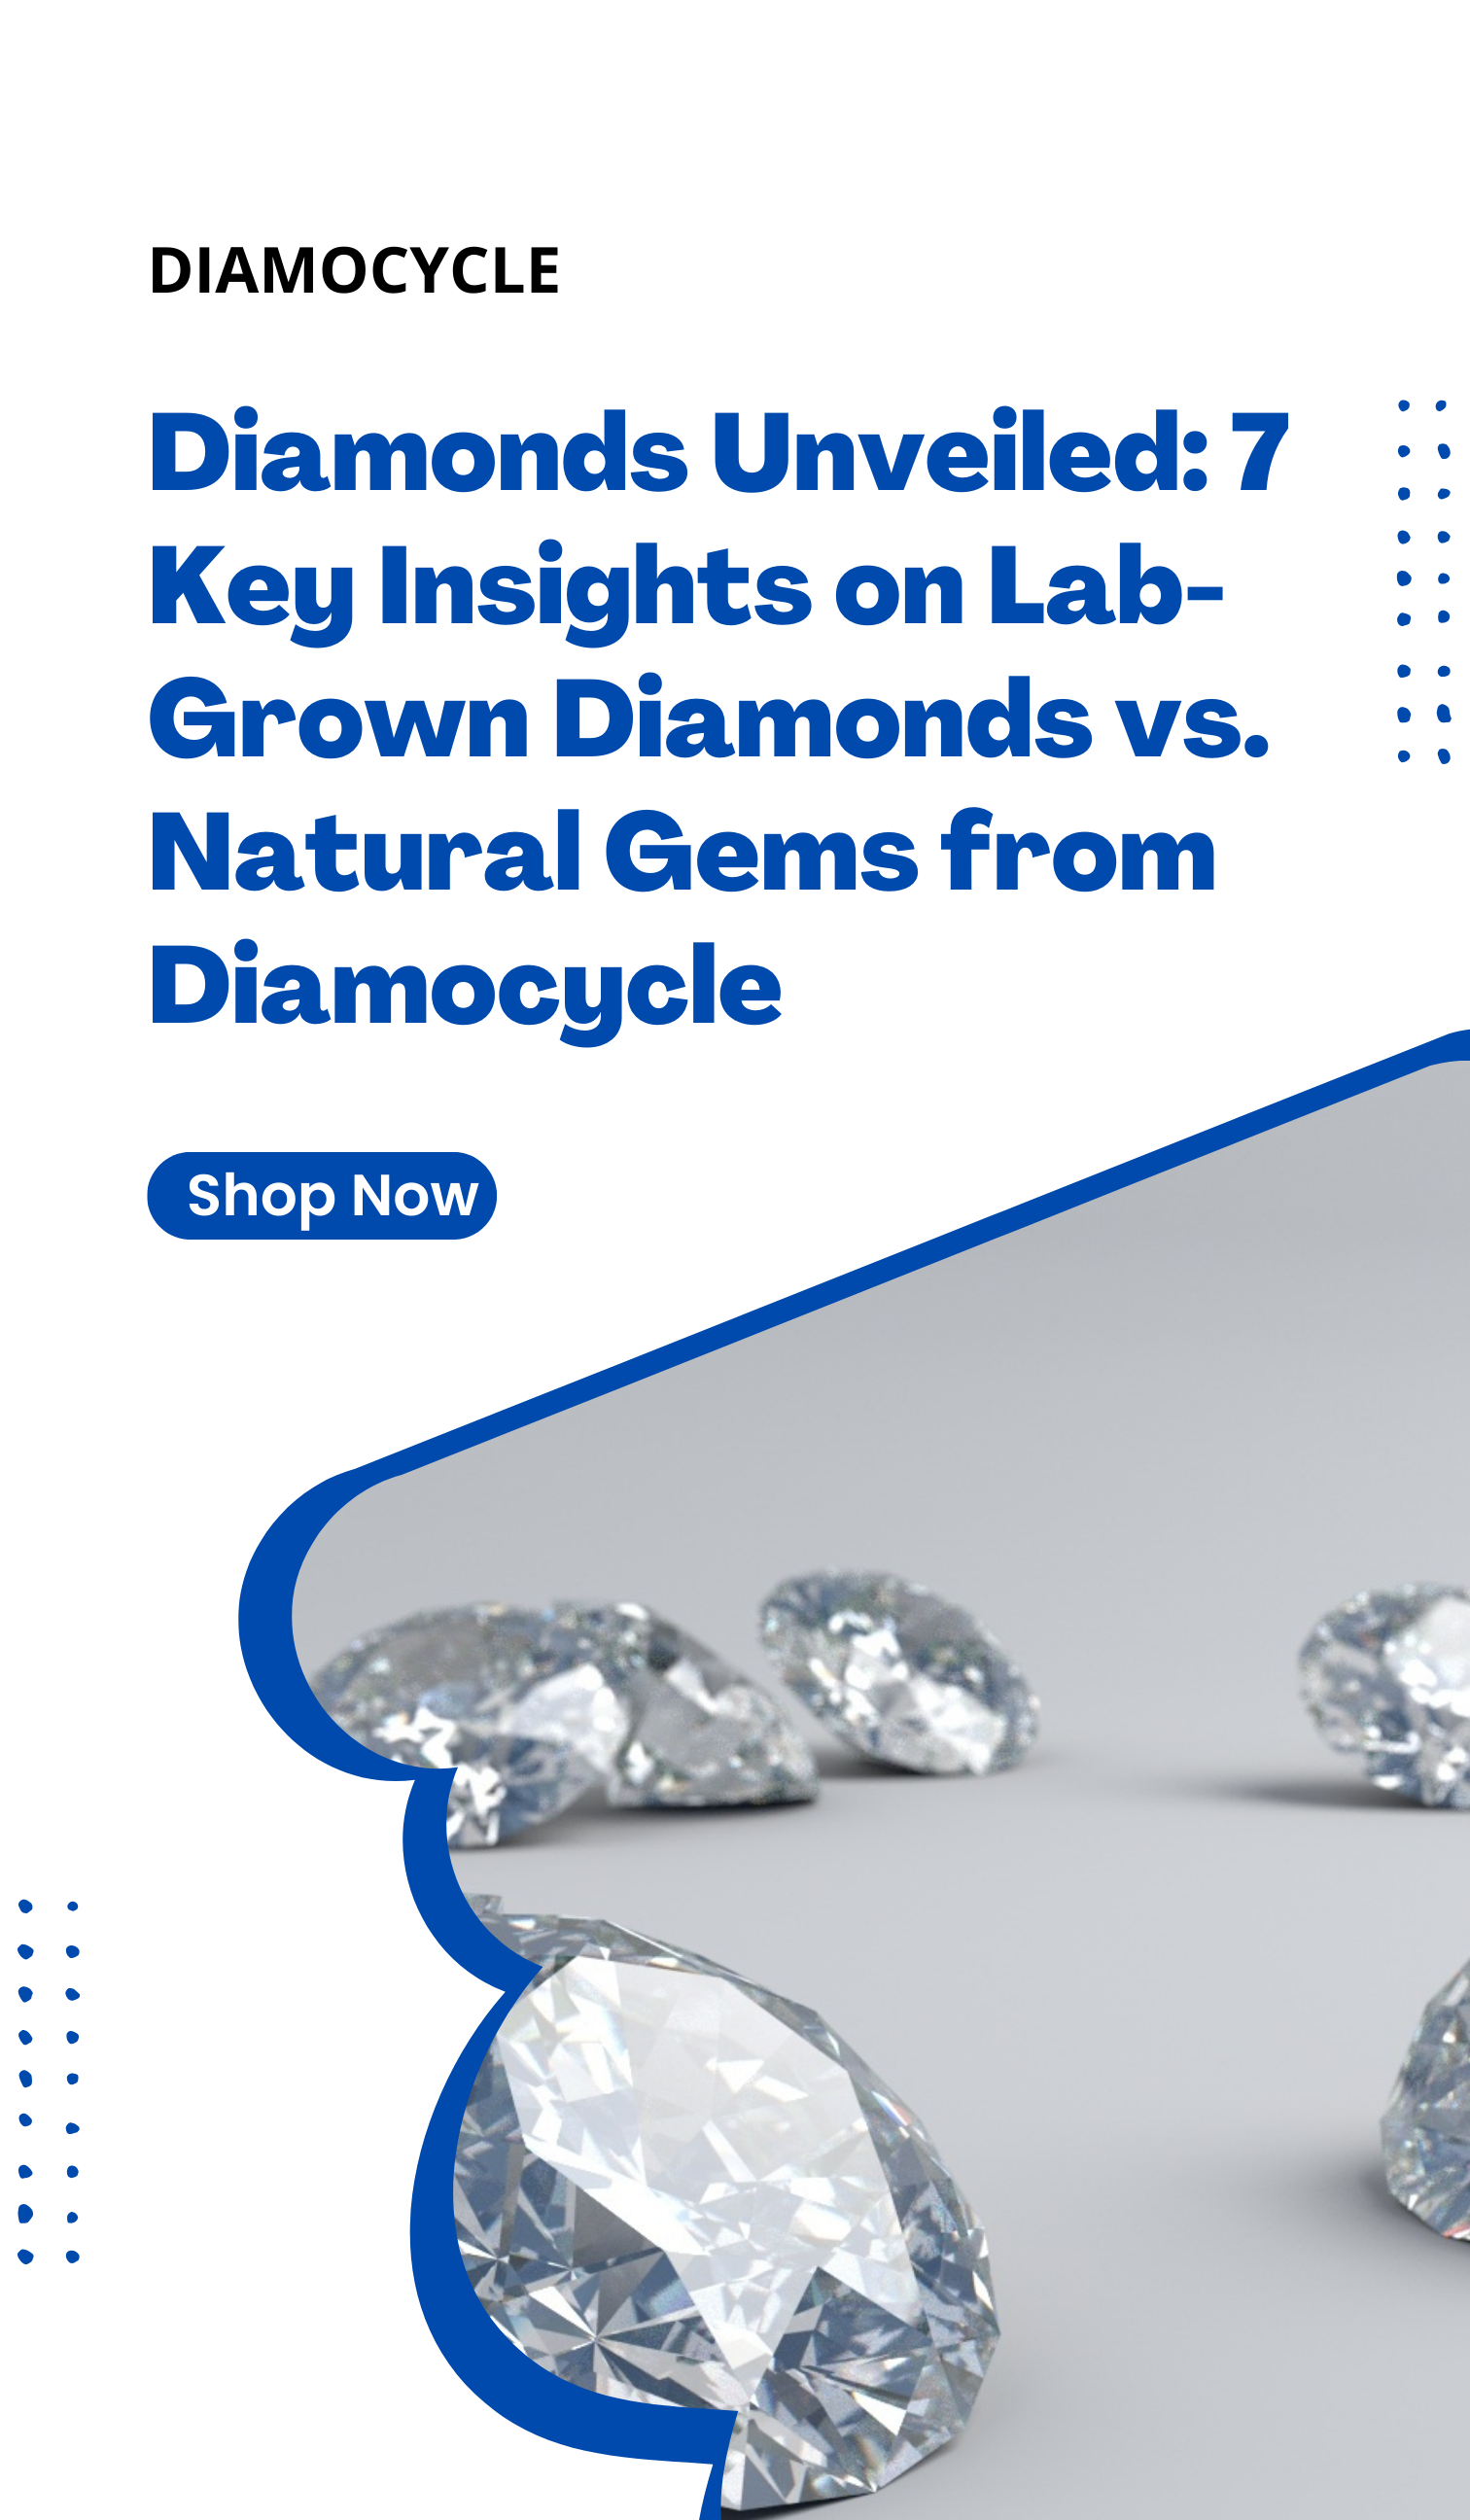 Diamonds Unveiled: 7 Key Insights on Lab-Grown Diamonds vs. Natural Gems from Diamocycle